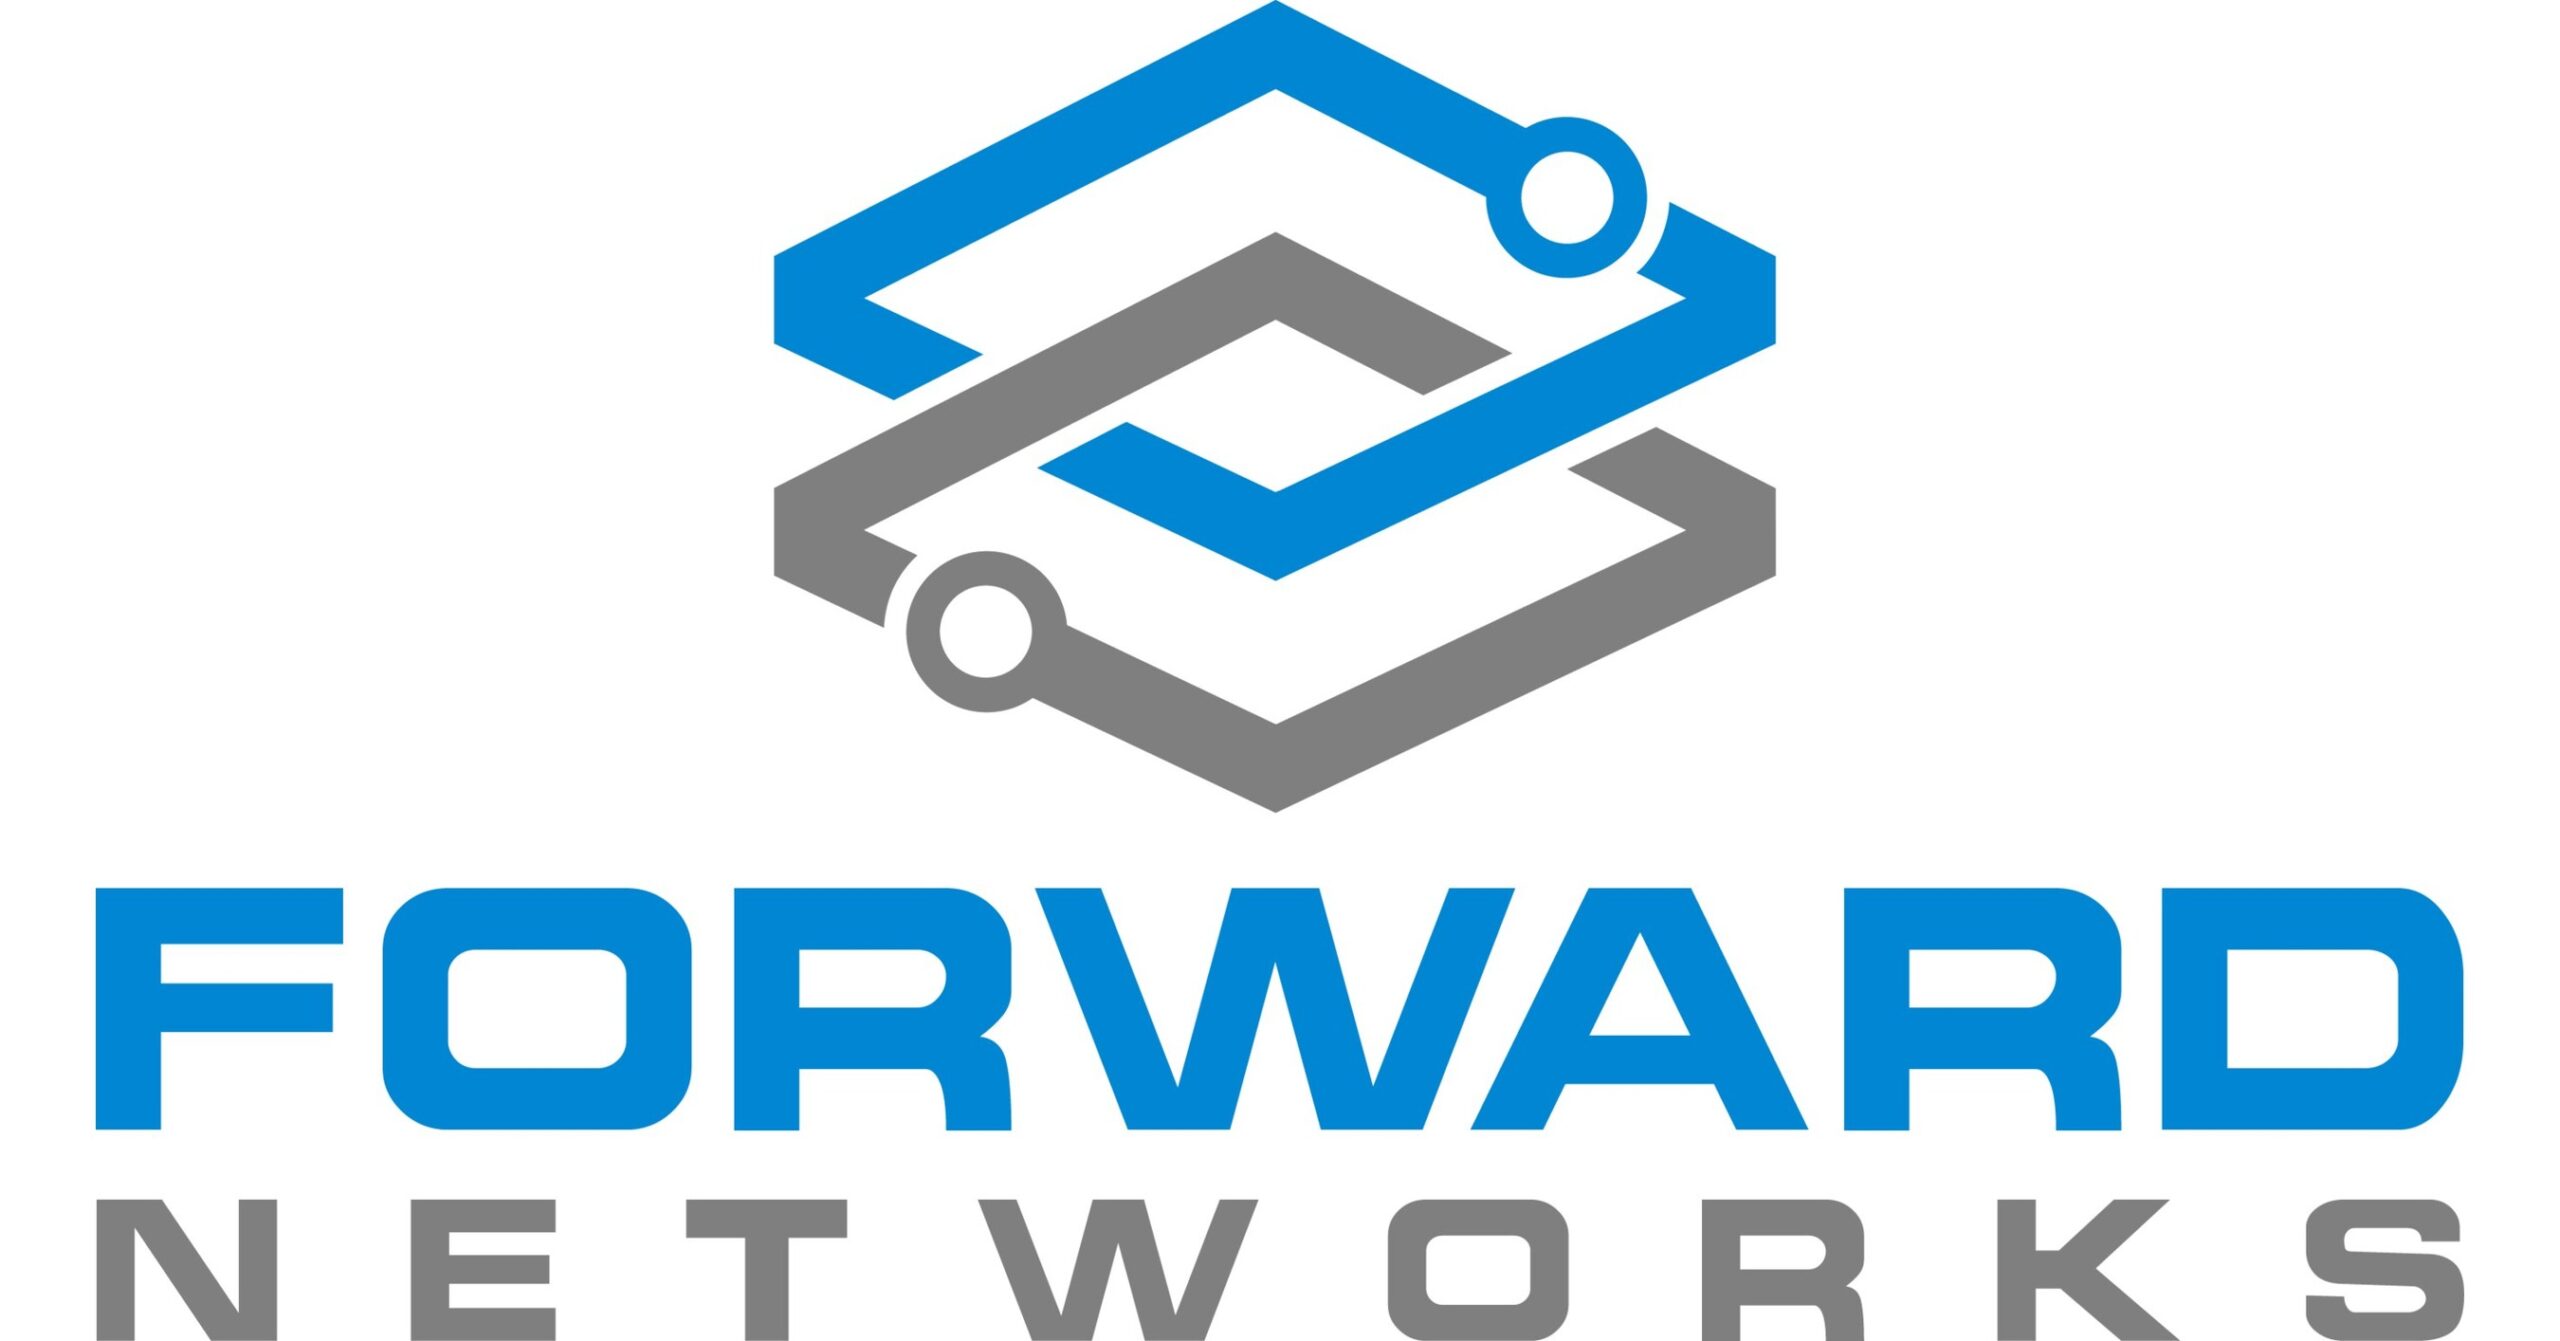 Forward Networks integrates with Rapid7 to model network behavior and mitigate device vulnerabilities